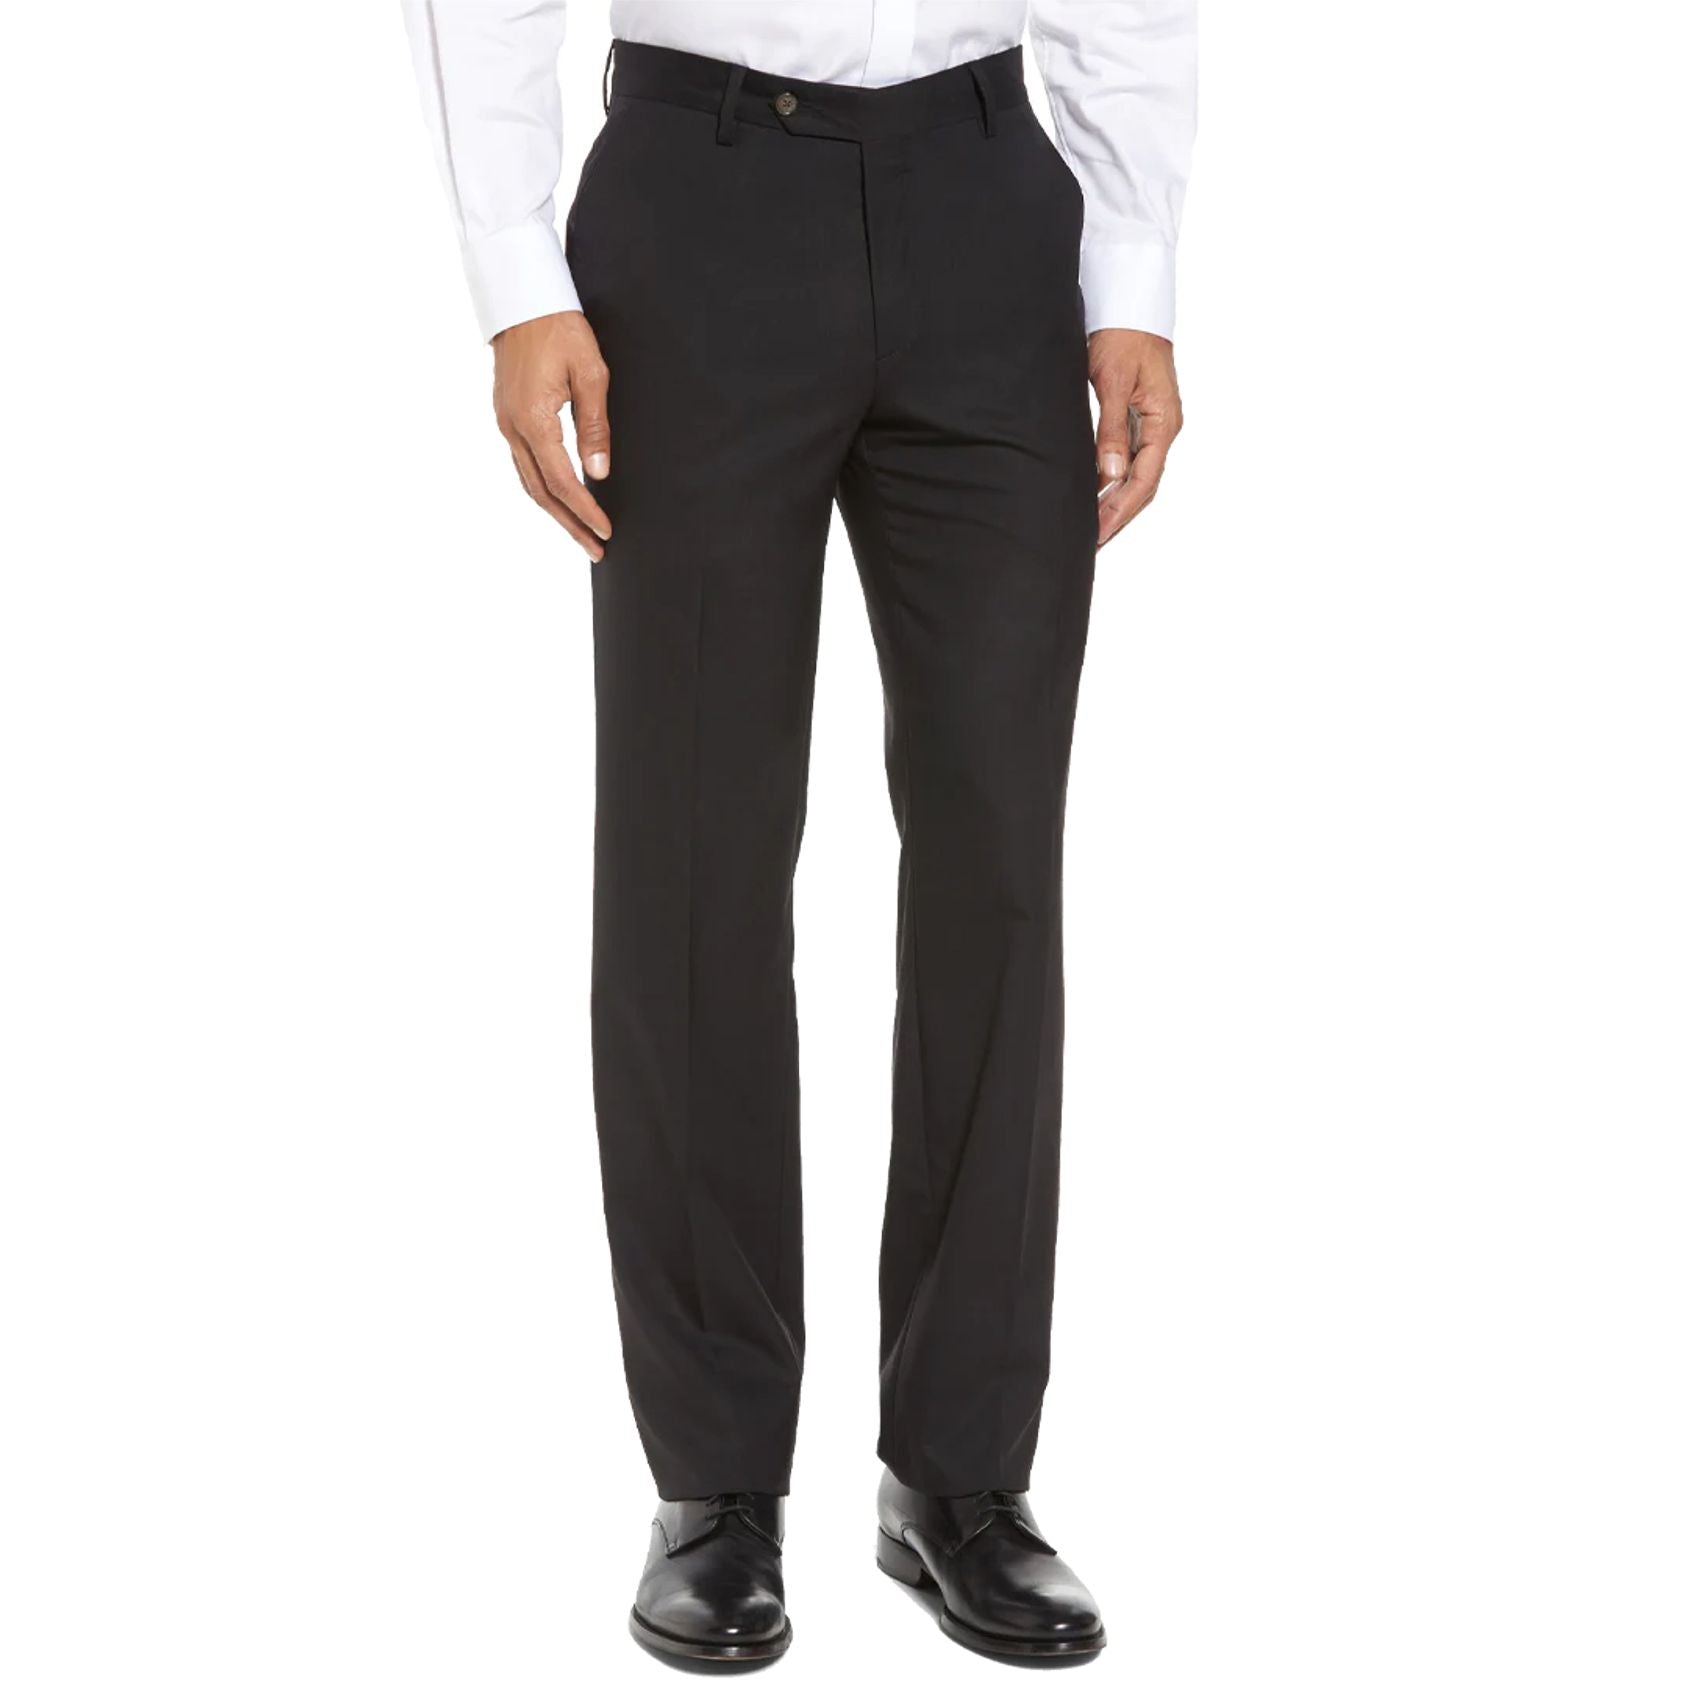 Stretch Worsted Wool Tropical Trouser in Black (Tribeca Modern Plain Front) by Berle